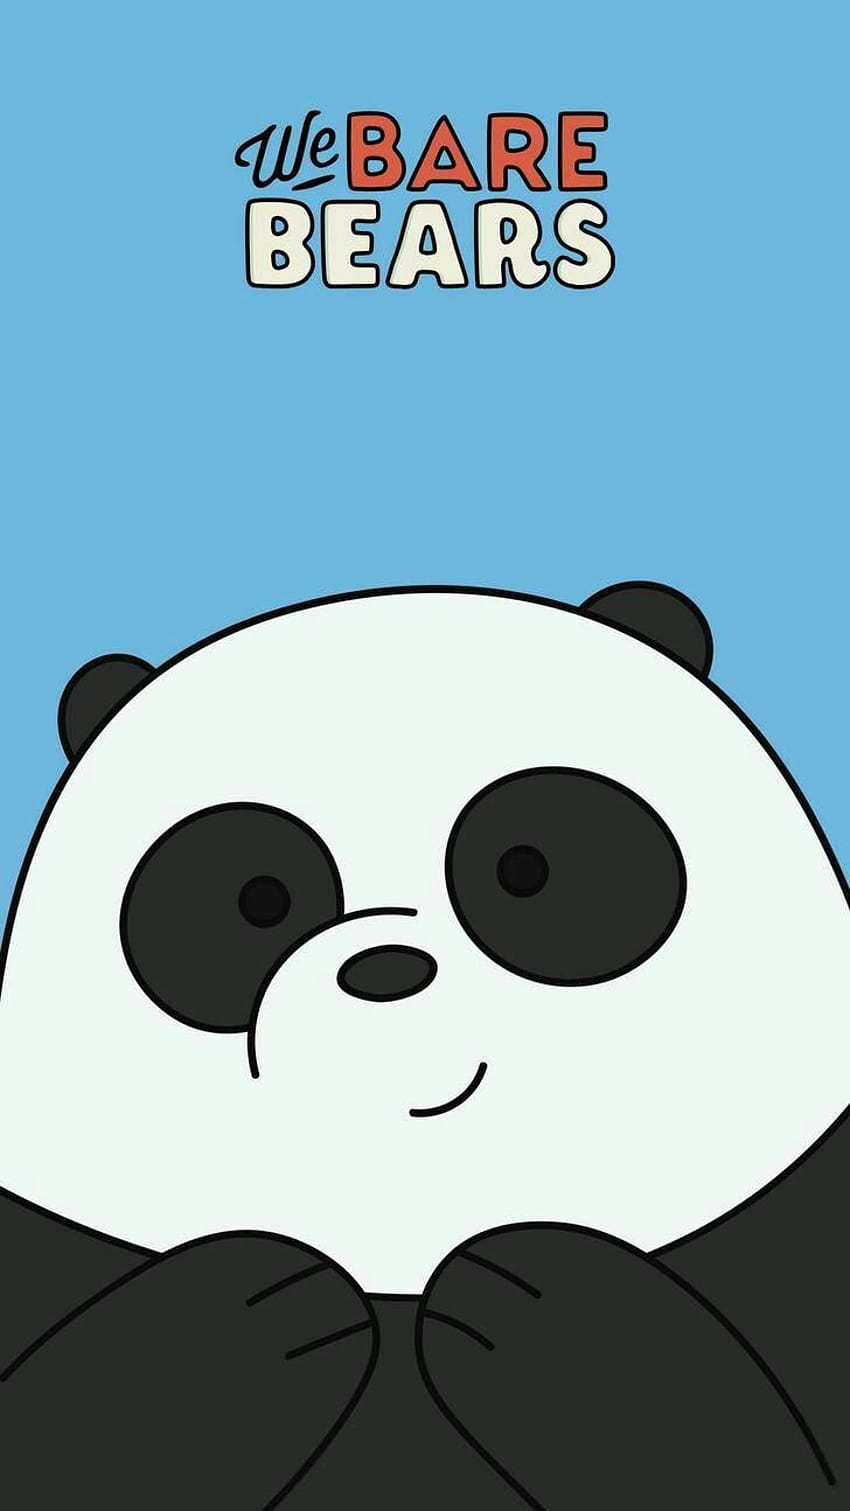 We Bare Bears wallpaper for iPhone and Android phone. - We Bare Bears